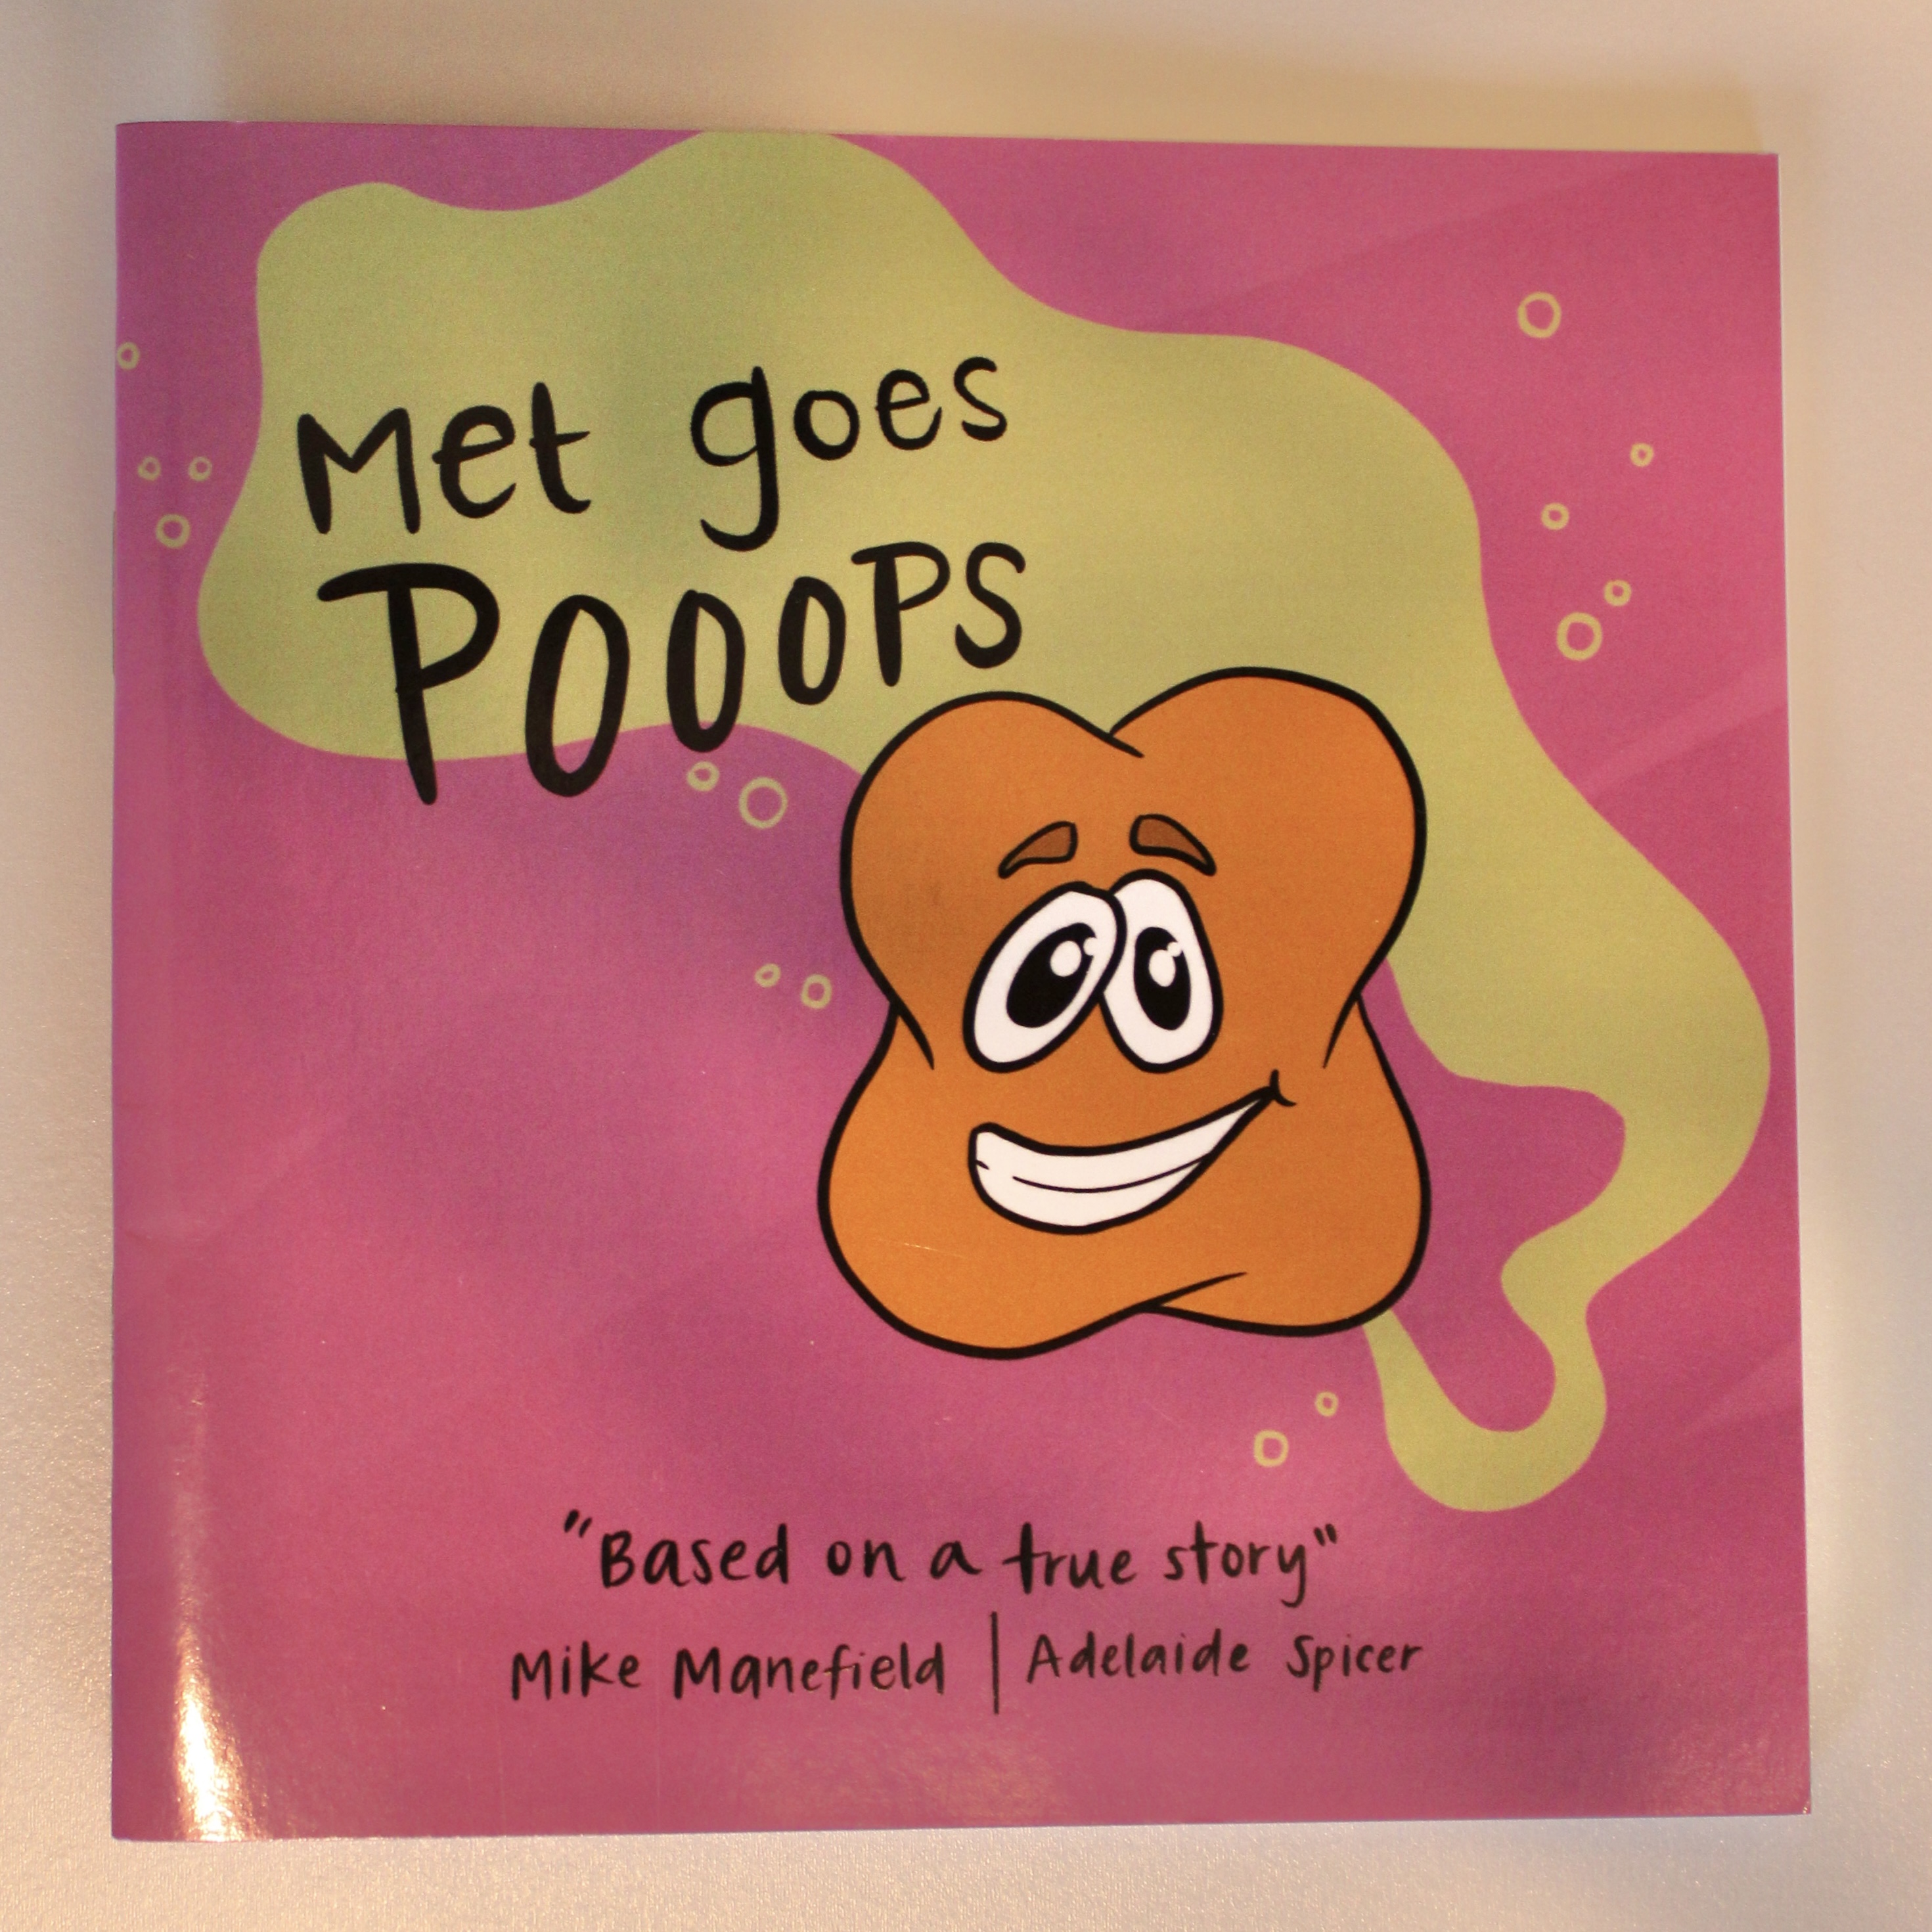 children's book cover with pink background and orange archaea cell that says Met Goes Pooops by Mike Manefield and illustrated by Adelaide Spicer